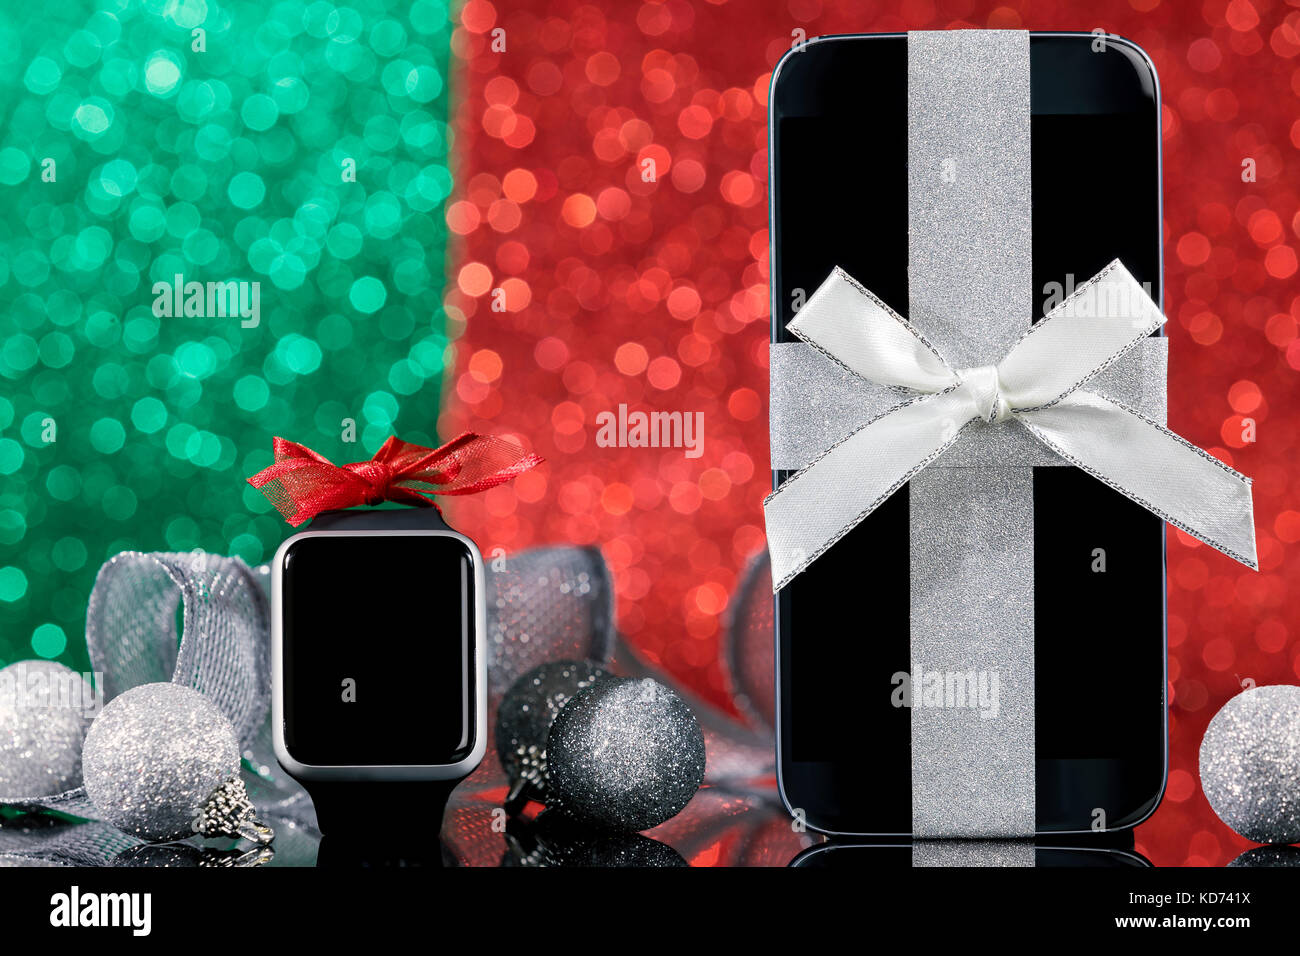 Smartphone and smartwatch and decorations for Christmas tree on black glass table over green and red background. Focus on smartphone. Stock Photo